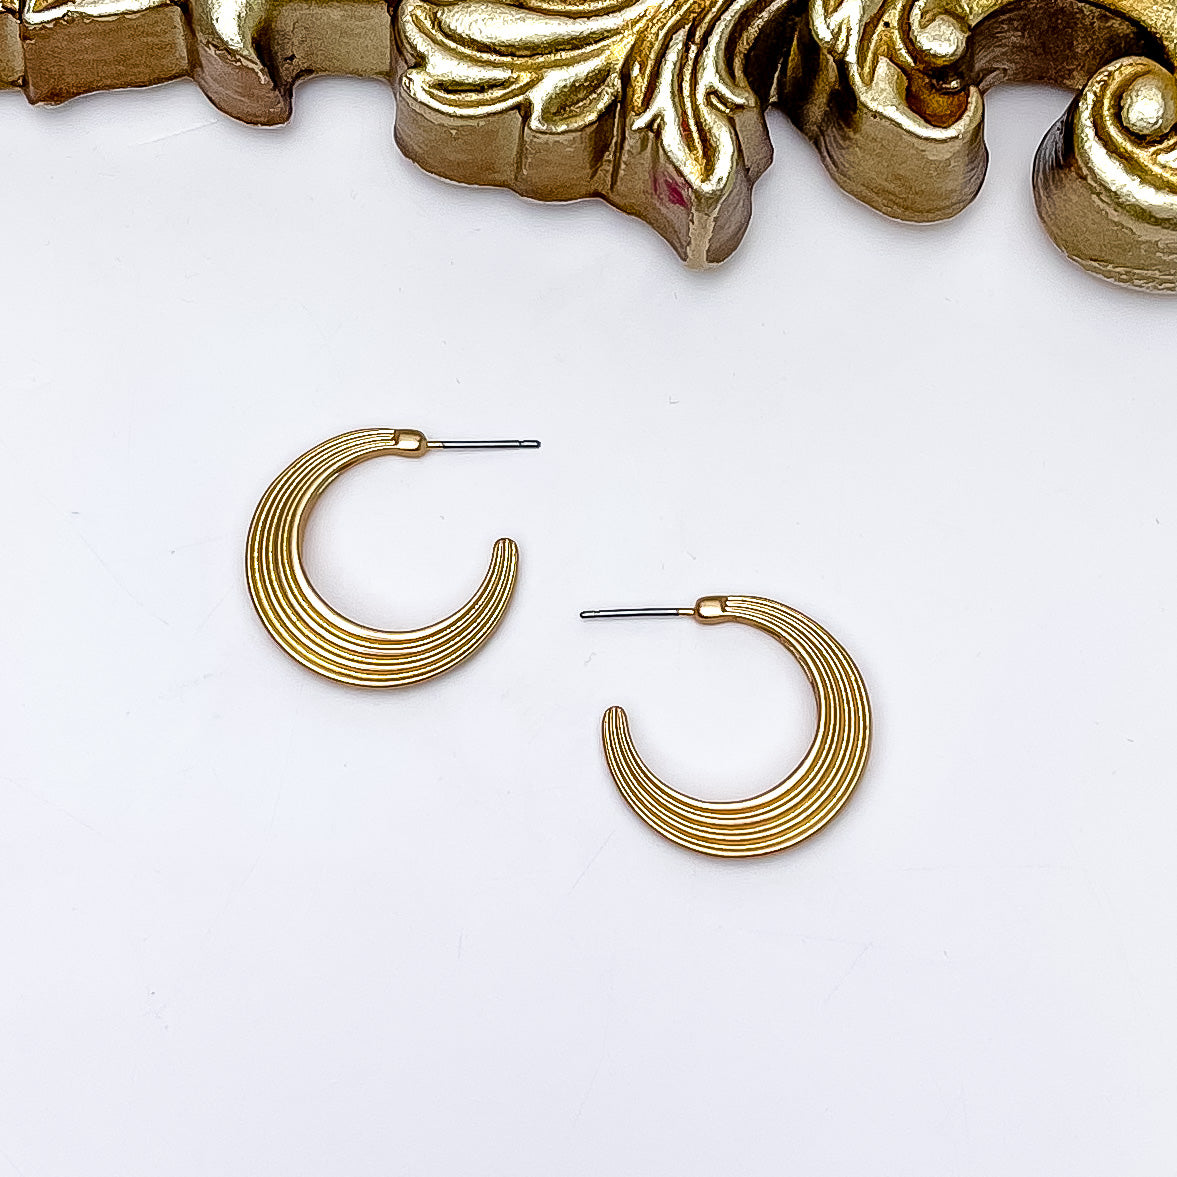 Livin' Life Gold Tone Small Hoop Earrings. Pictured on a white background with a gold frame above the earrings.